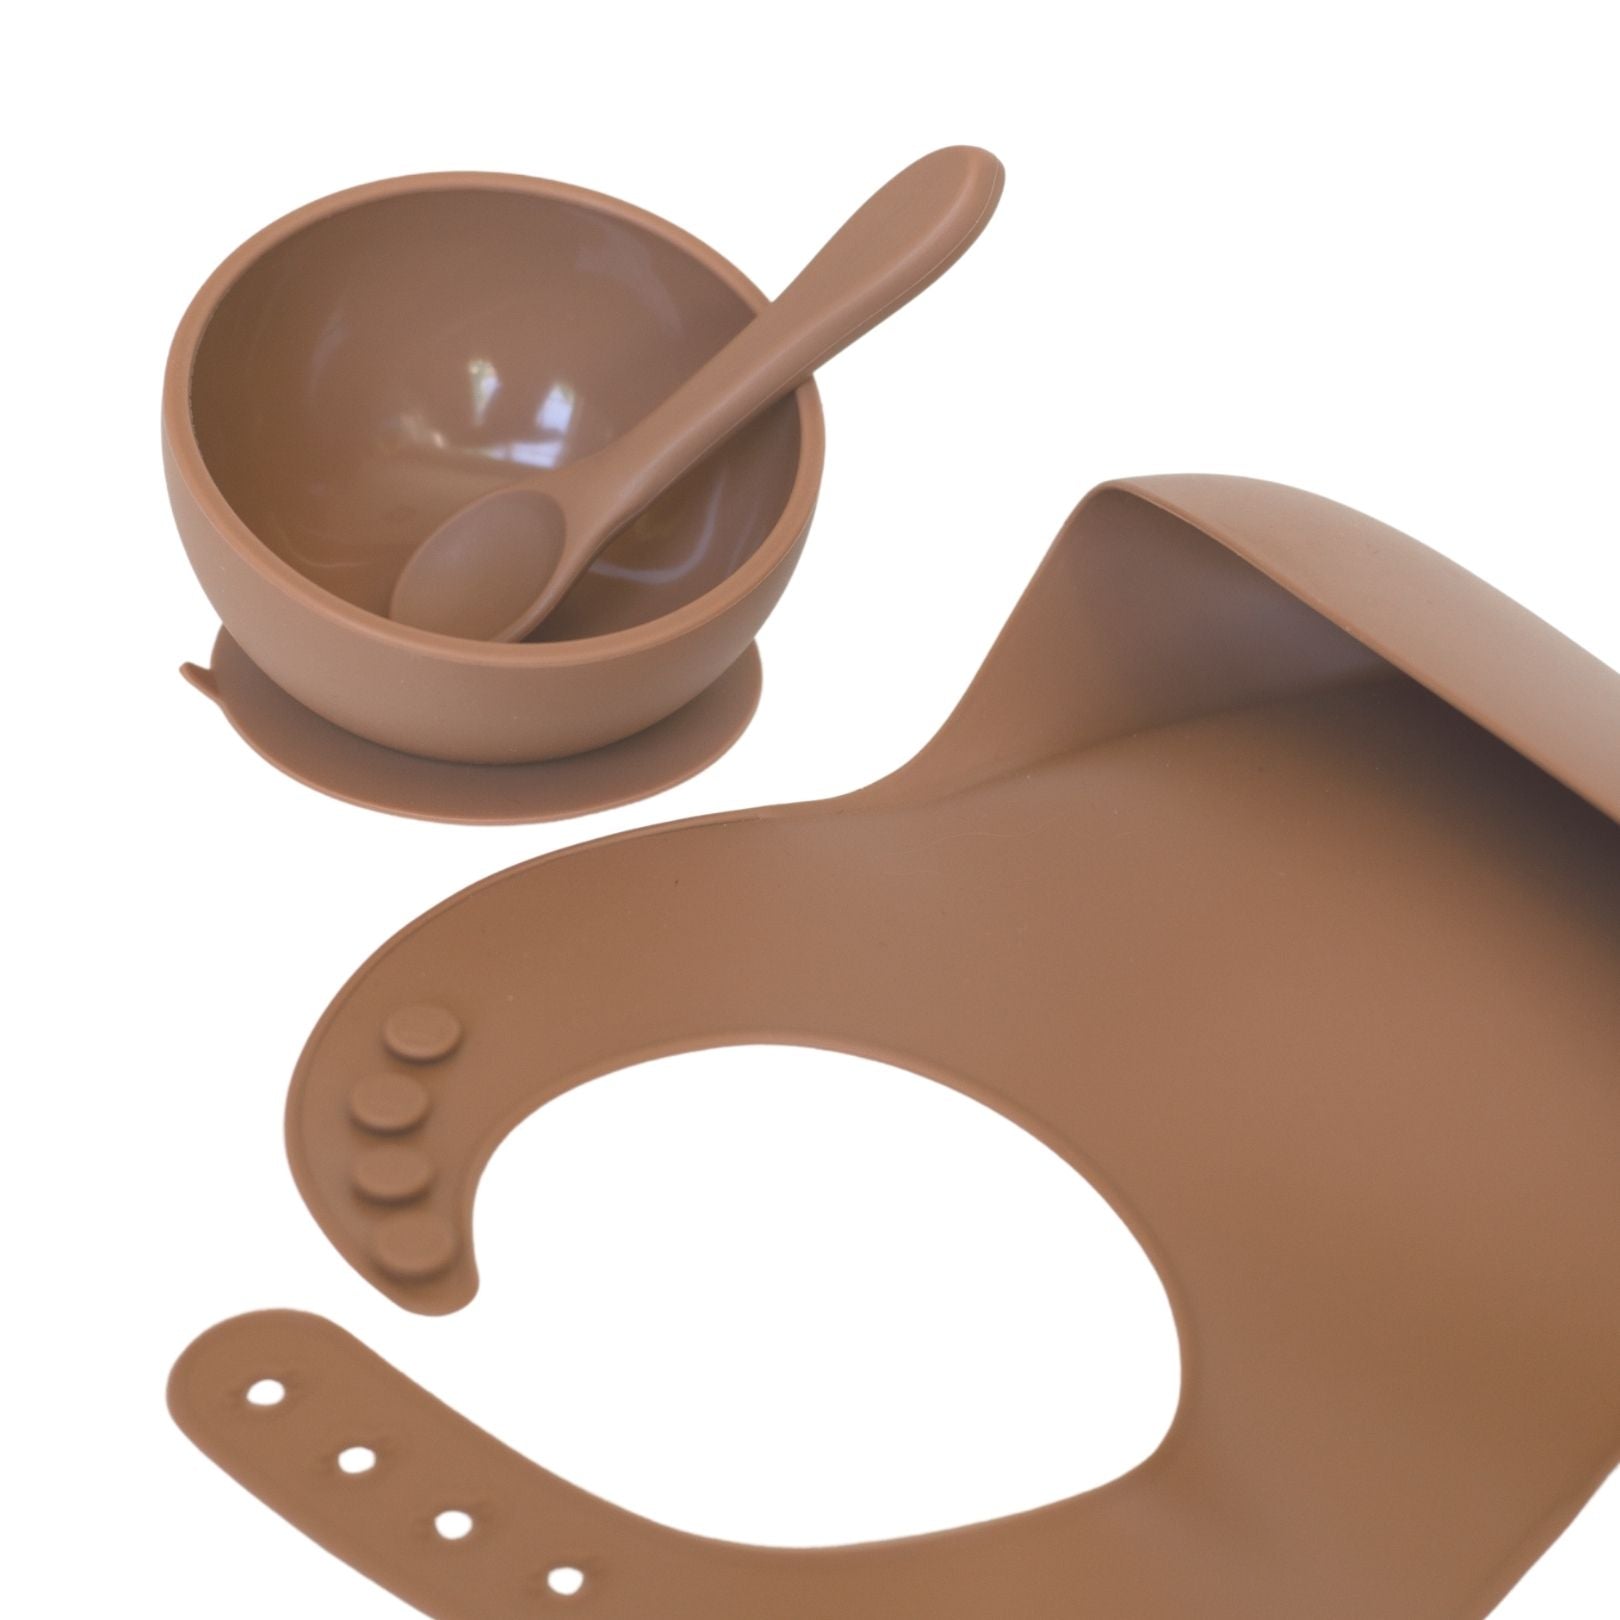 Clay spoon with silicone bib and suction bowl